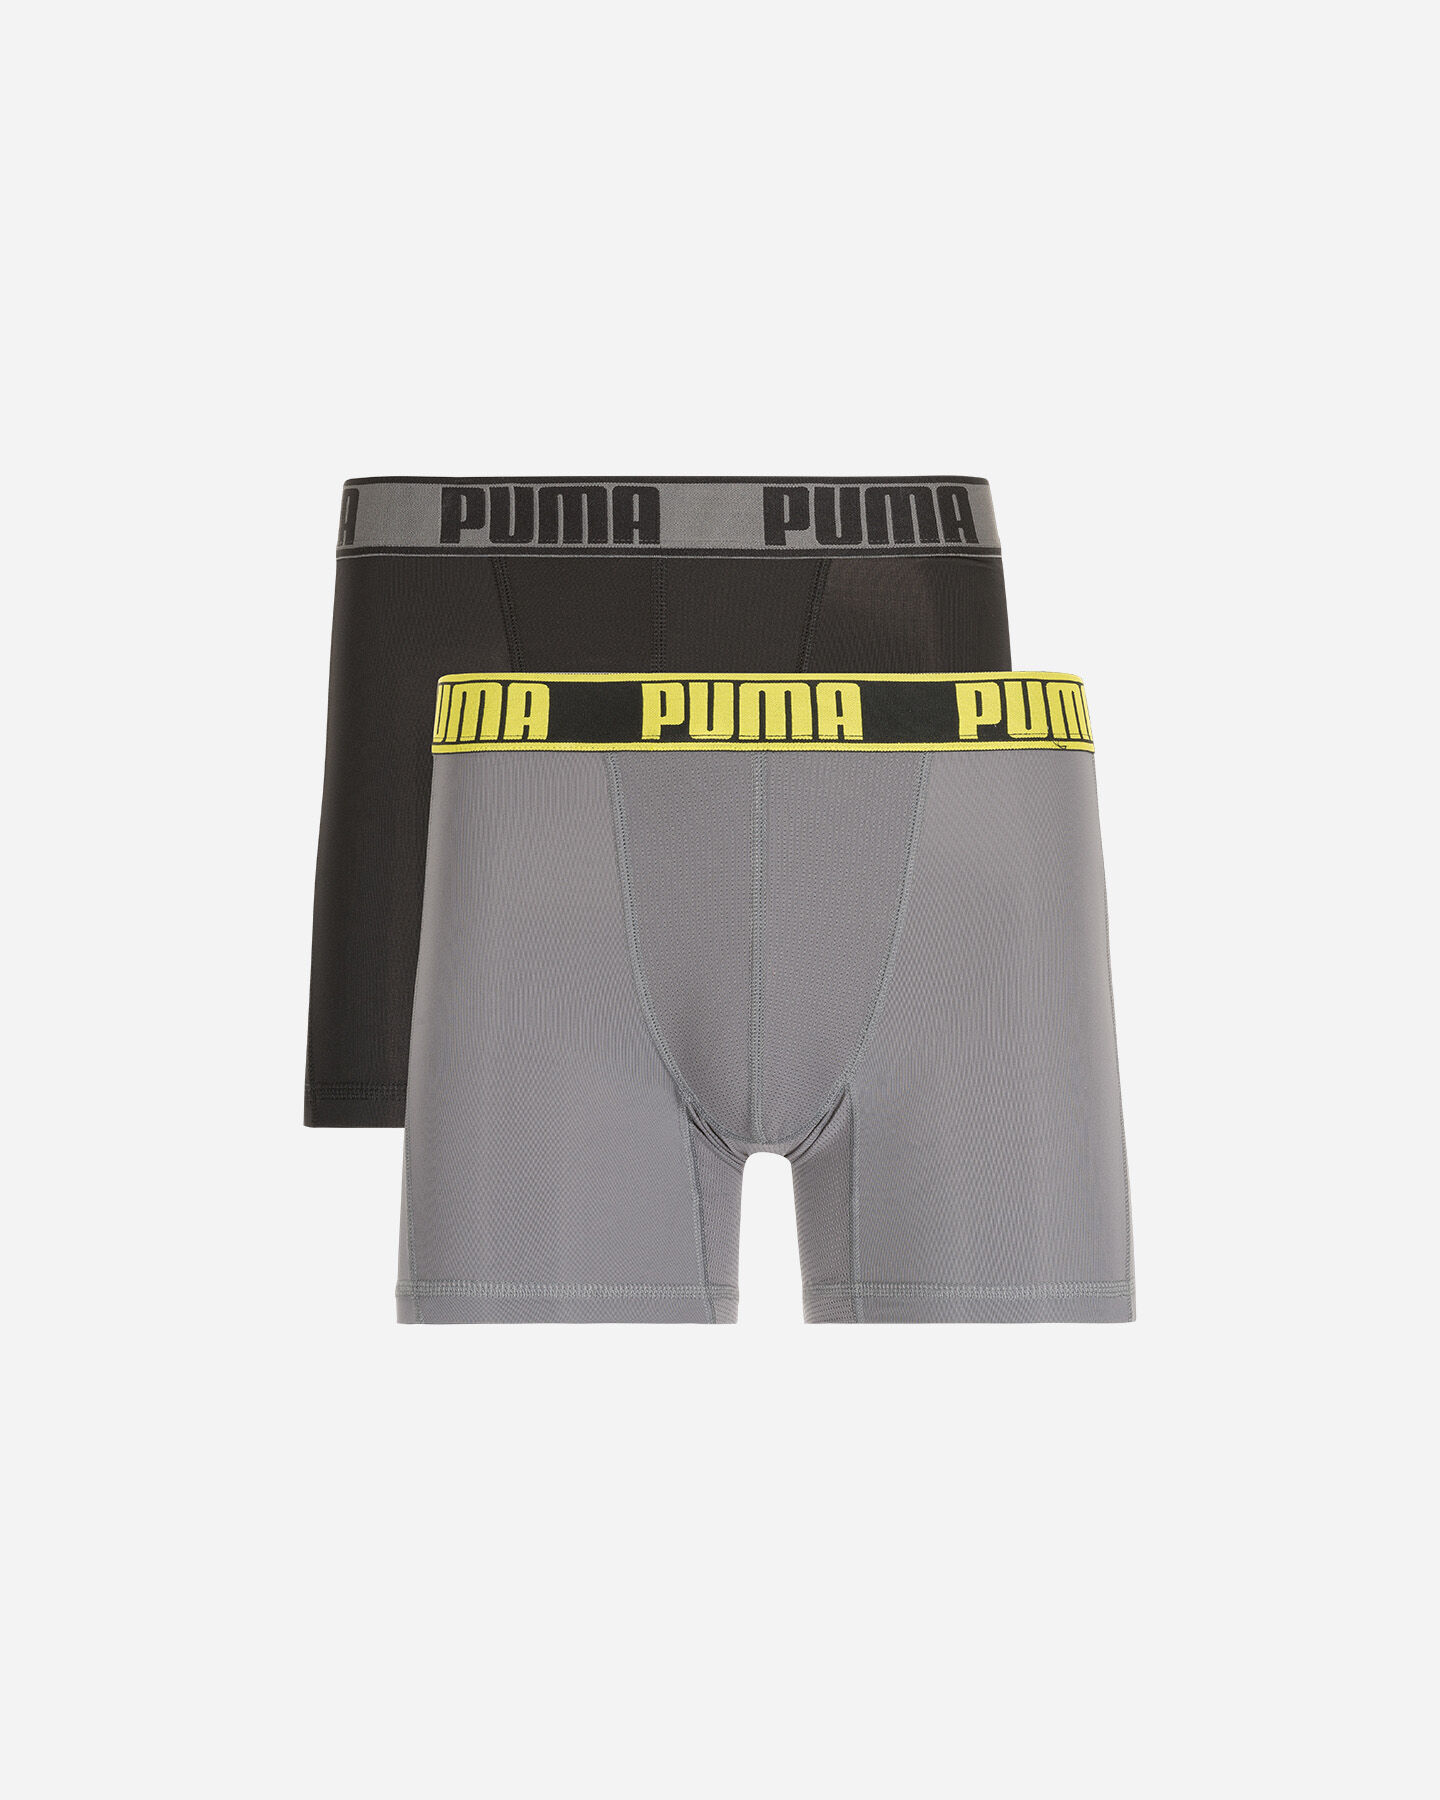  Intimo PUMA 2 PACK BOXER ACTIVE PACKED M S4076476|319|020 scatto 0